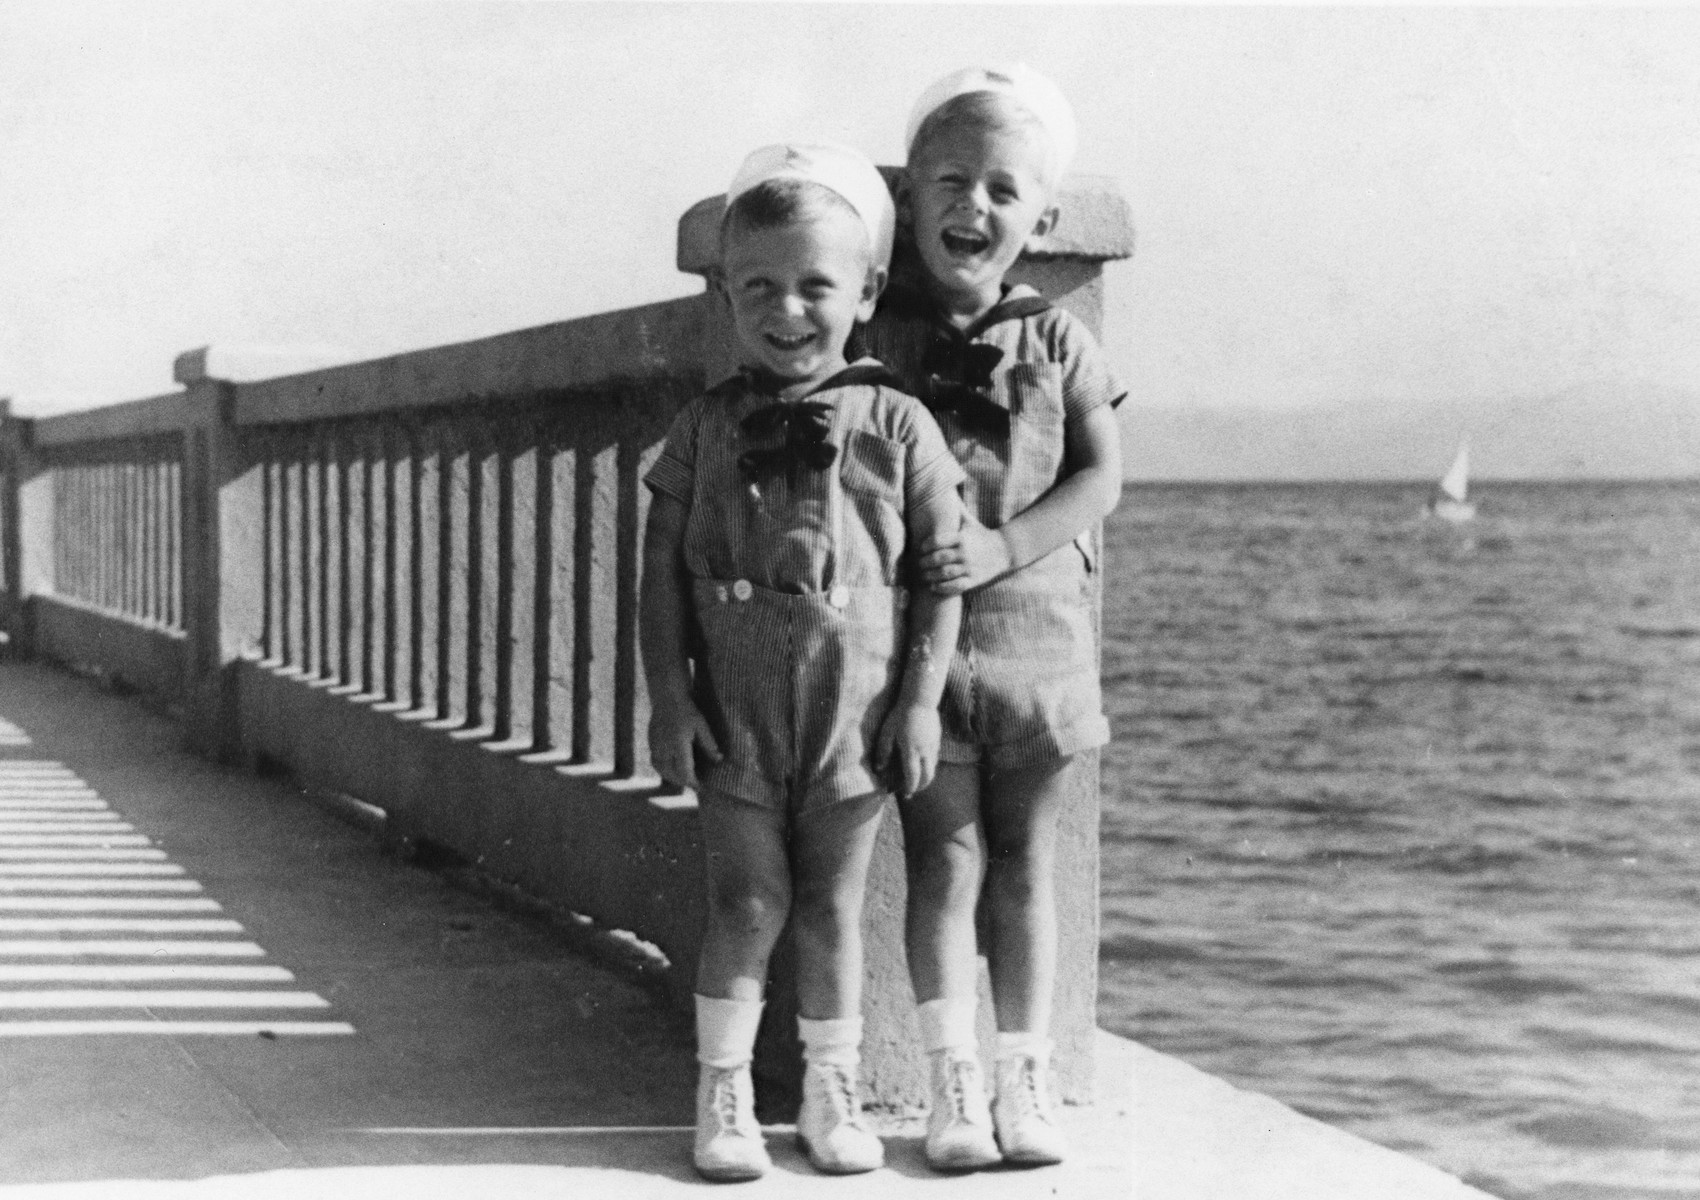 Two young Jewish brothers pose on a pier overlooking the Adriatic Sea in Crikvenica, Croatia, Augut 12, 1939.

Pictured are Branko (left) and Pavel (right) Deutsch.